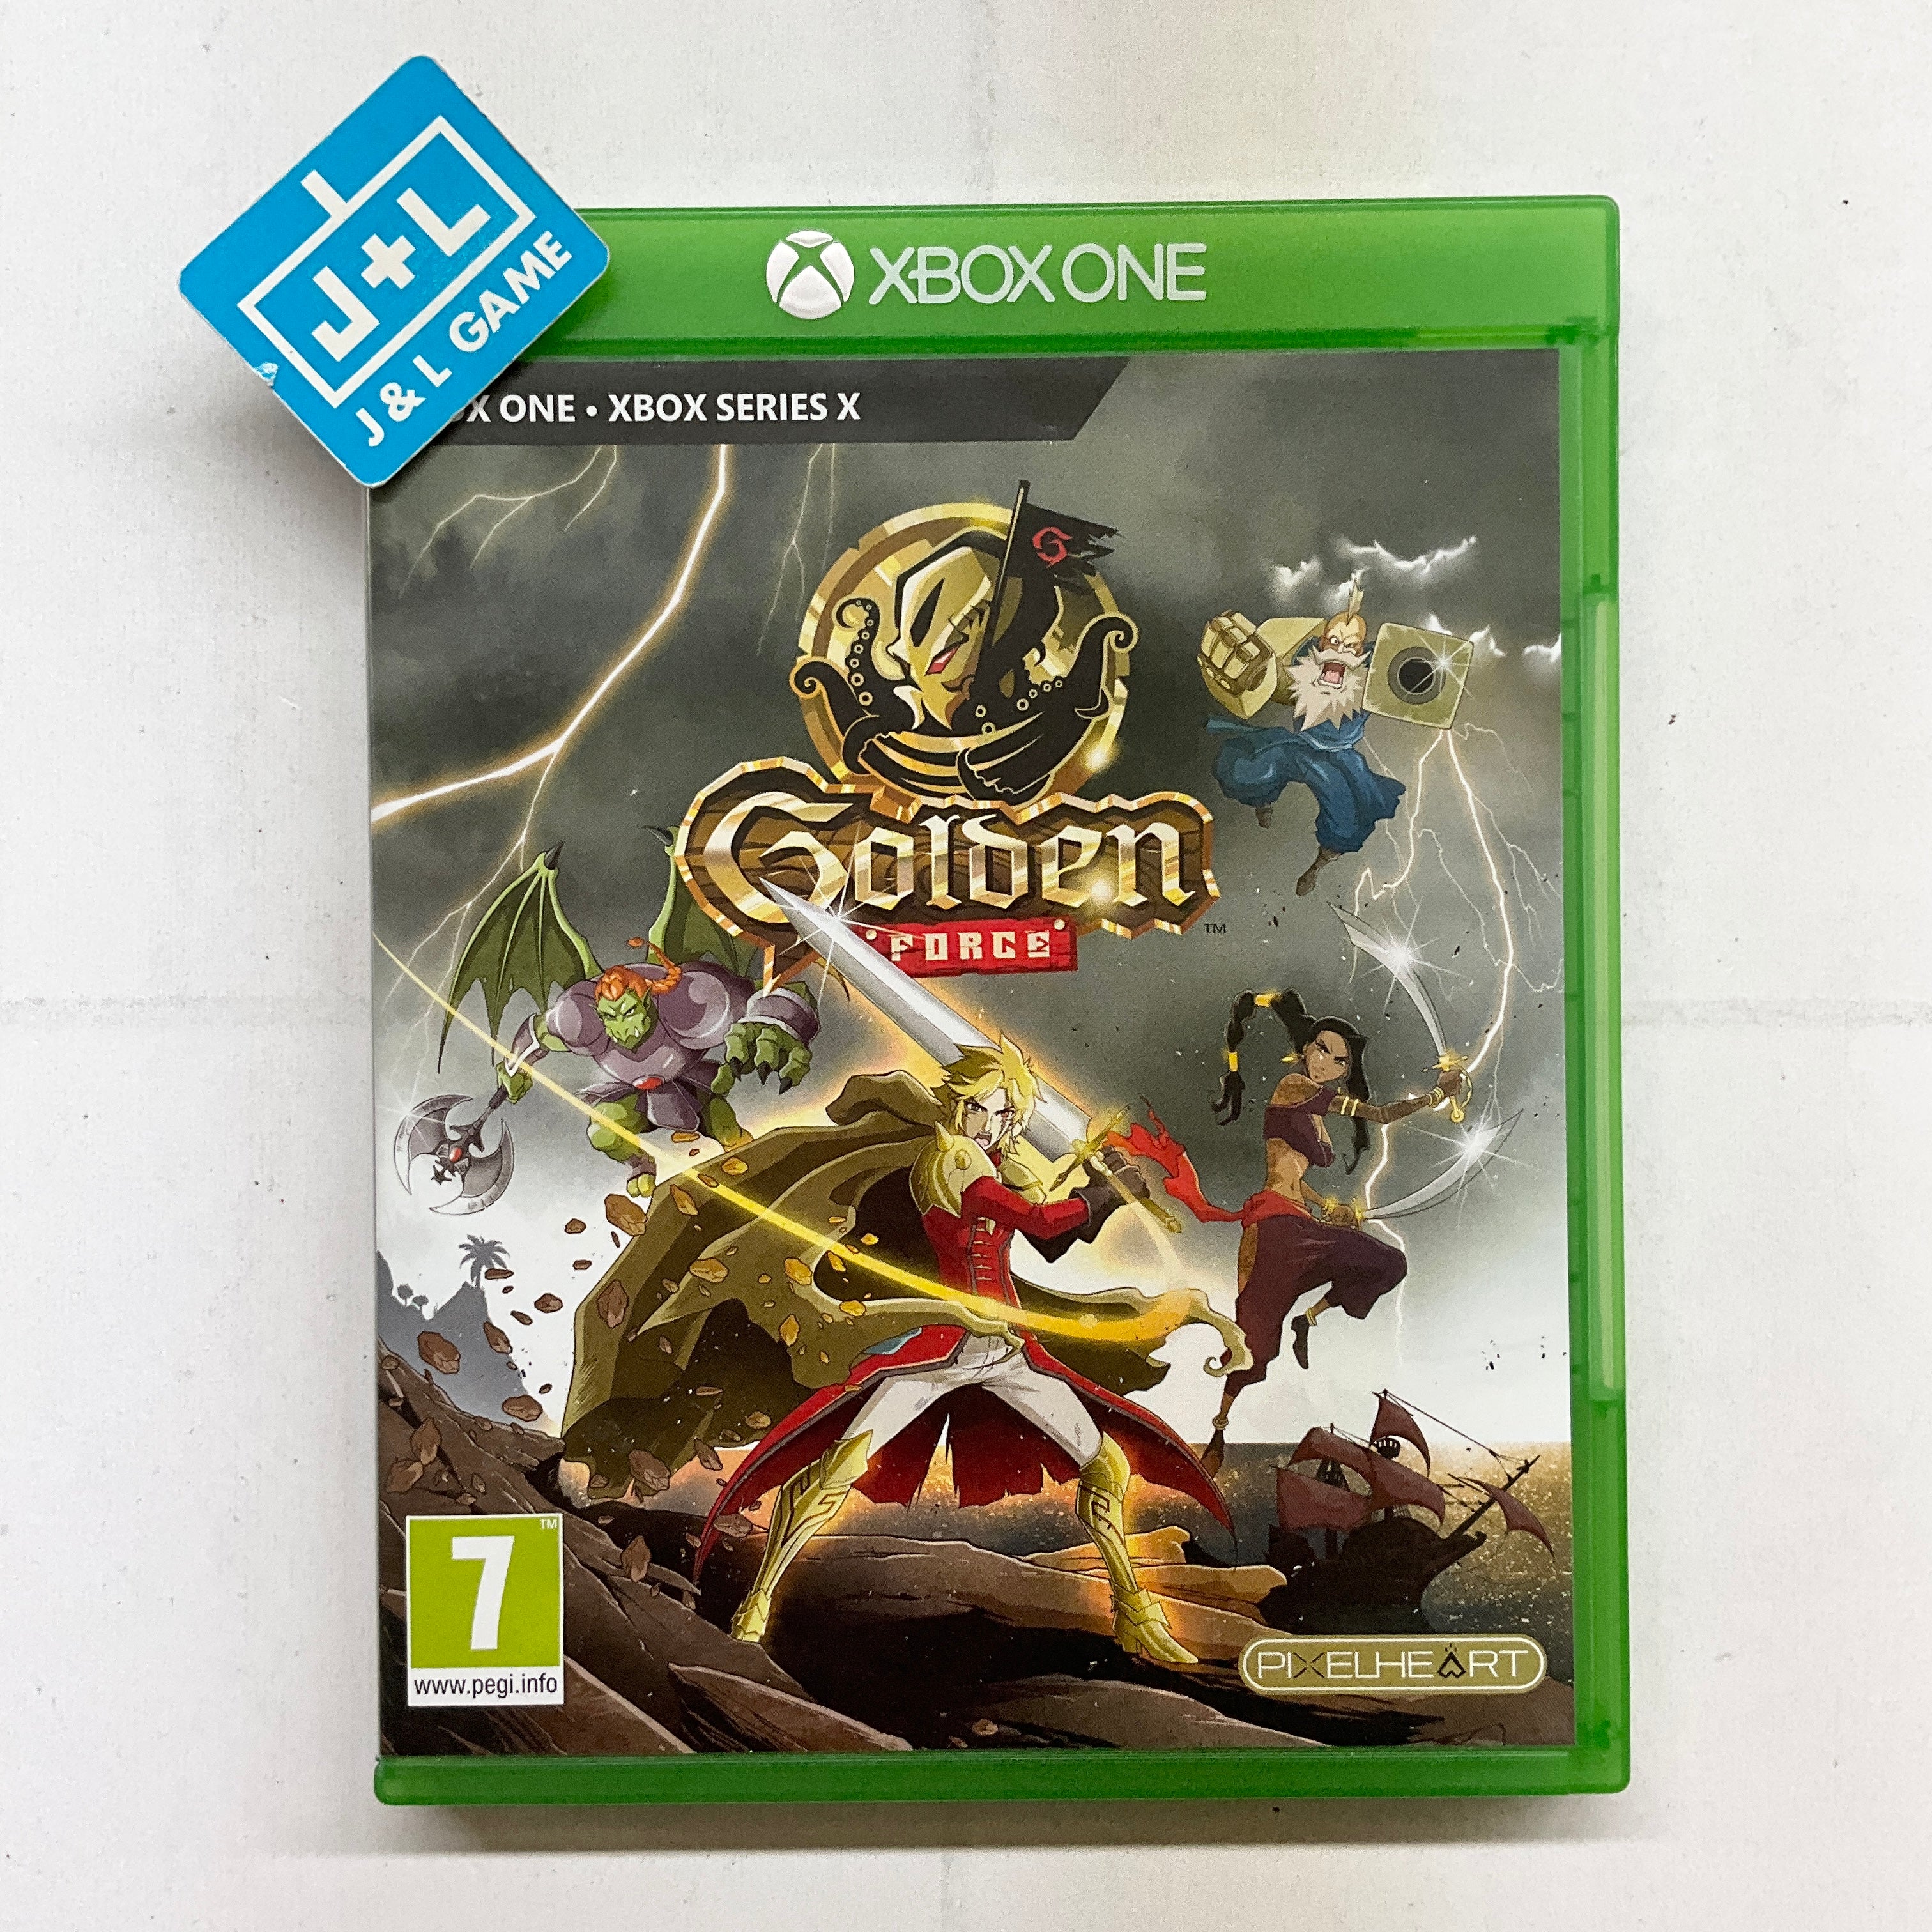 Golden Force - (XB1) Xbox One [Pre-Owned] (European Import) Video Games PixelHeart   